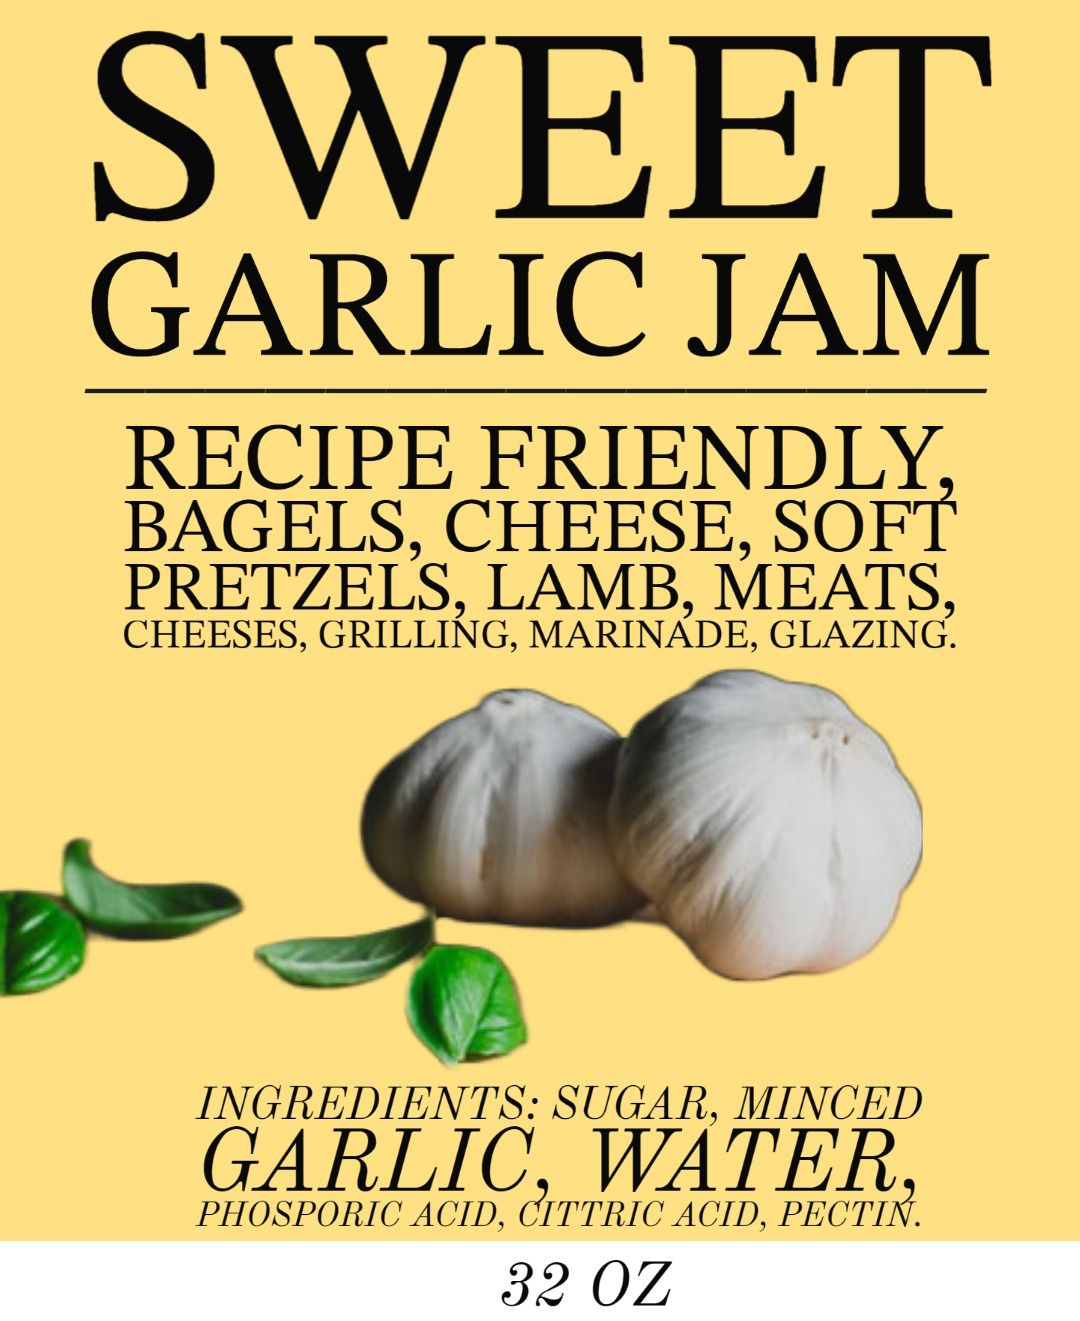 Yellow label with 2 large garlic cloves & leaves, created for 32oz Sweet Garlic Jam label.